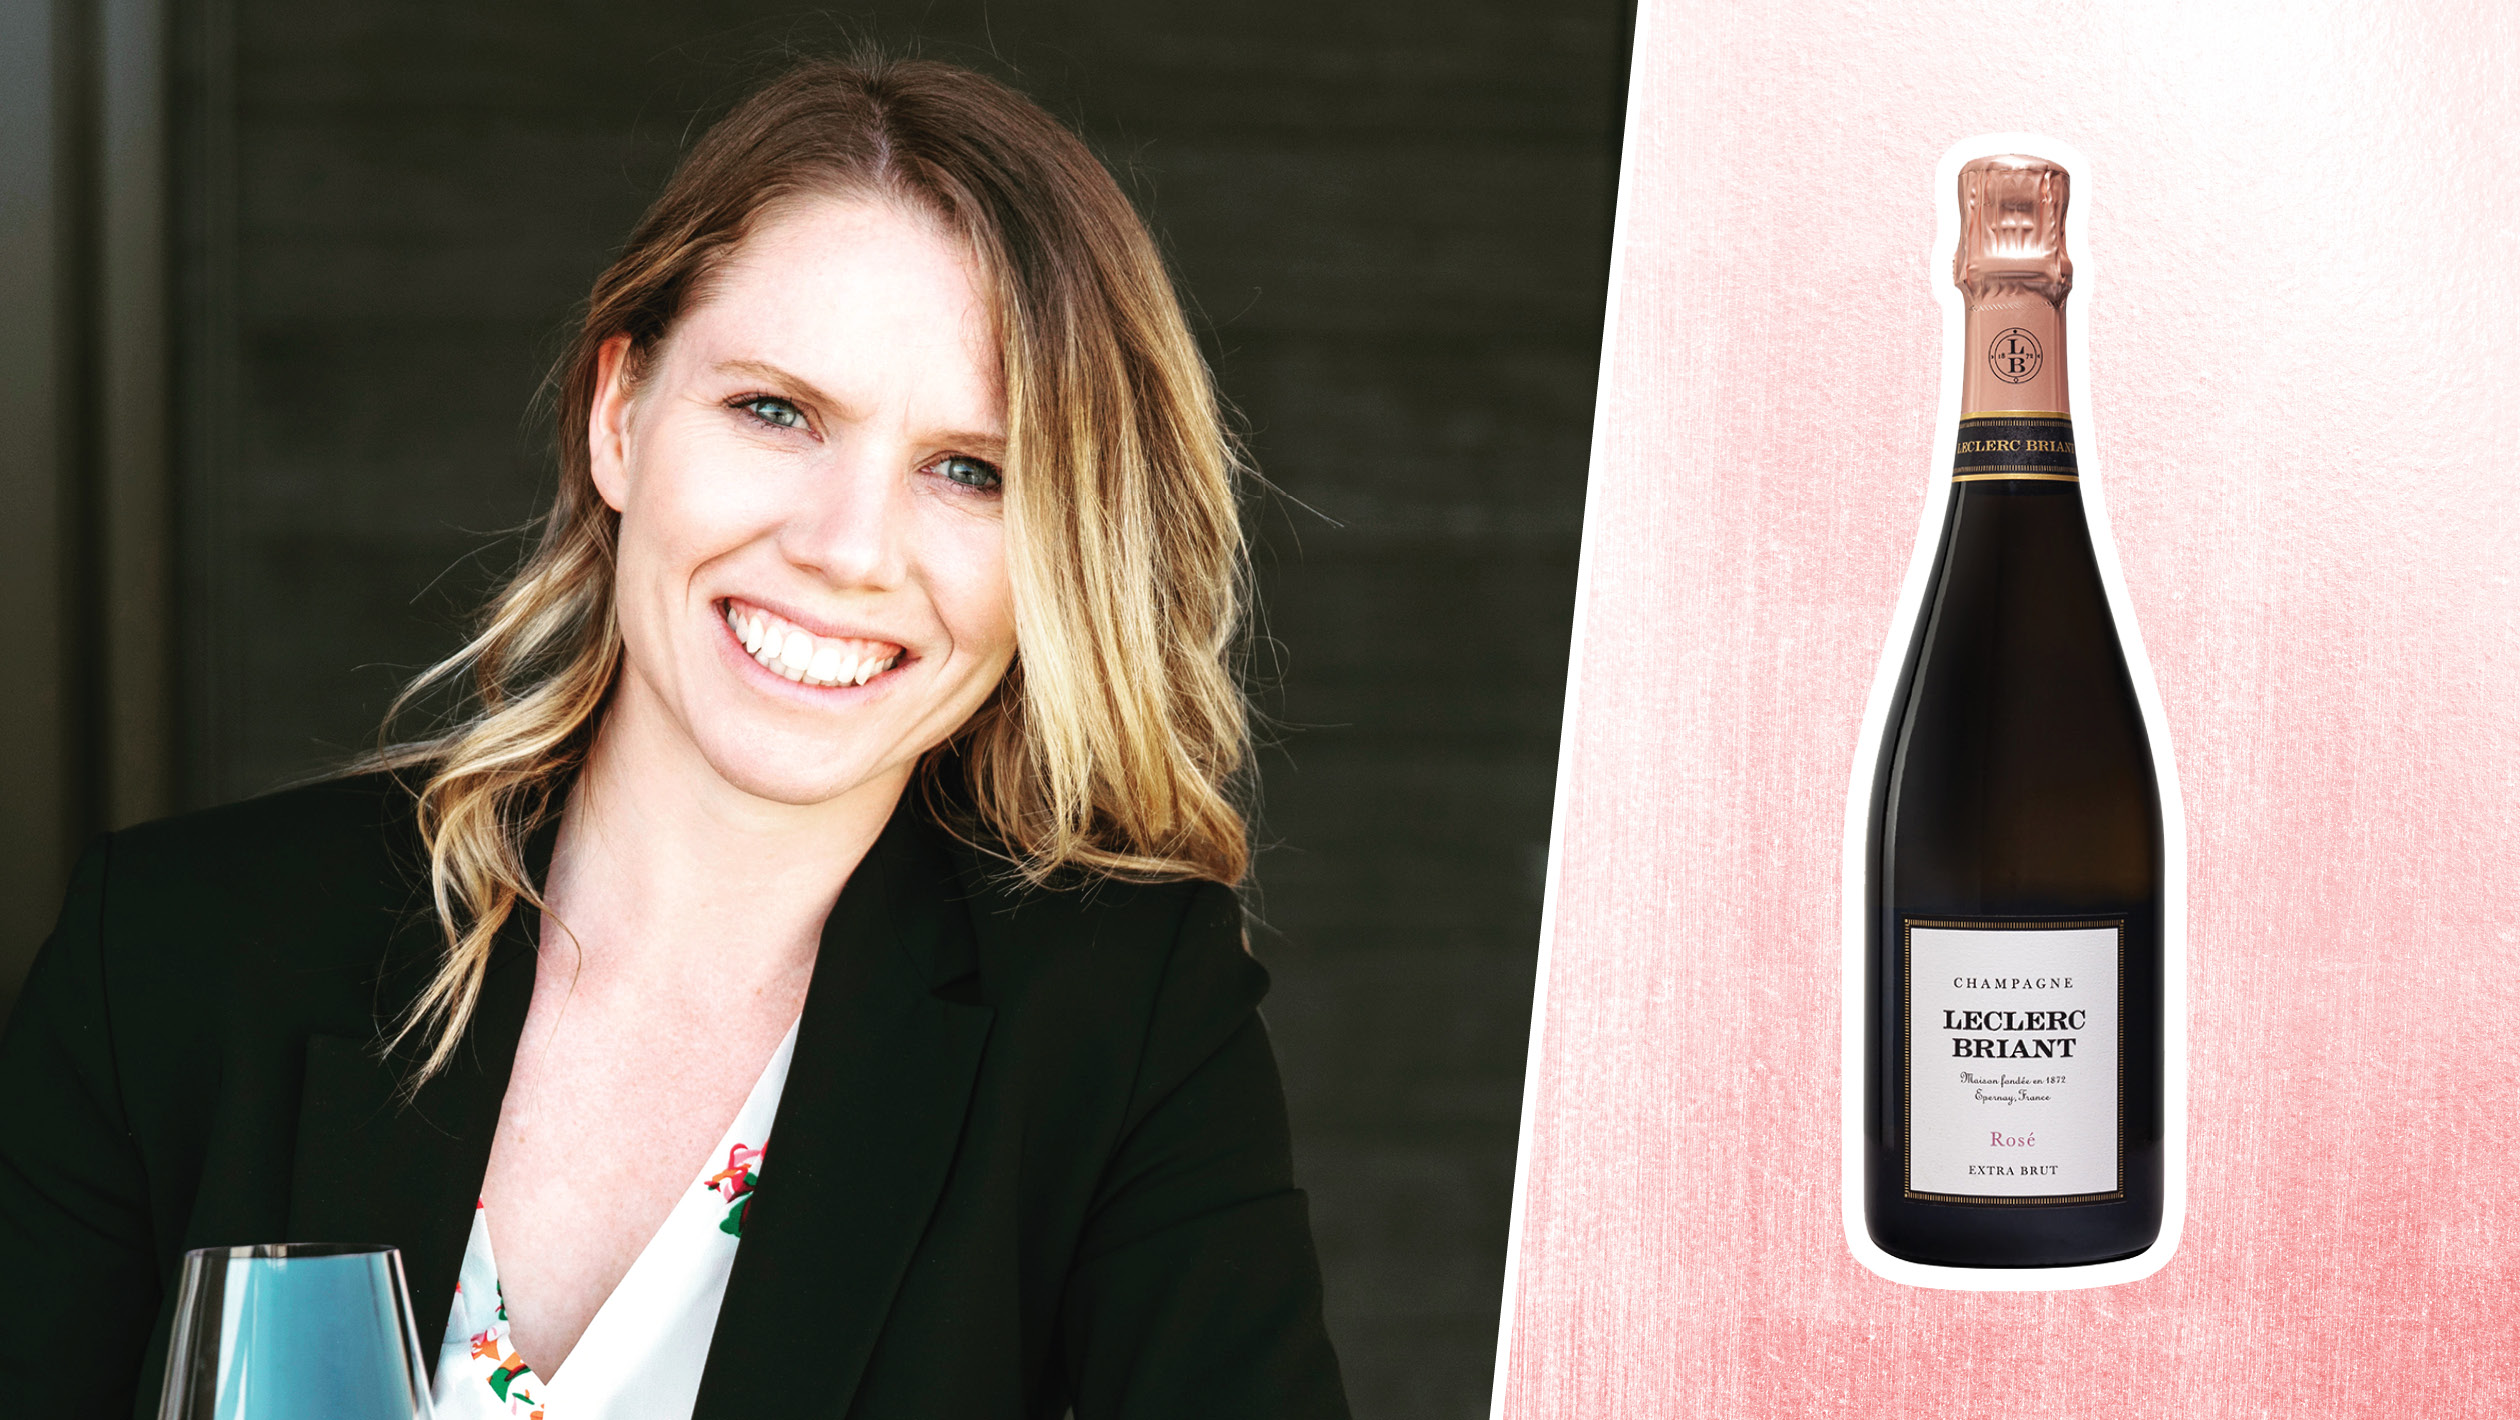 From left to right: Kaleigh Brook, the manager of The Thief Fine Wine and Beer (photo courtesy of Kalleigh Brook); Champagne Leclerc Briant Brut Rosé NV (photo courtesy of Winebow).